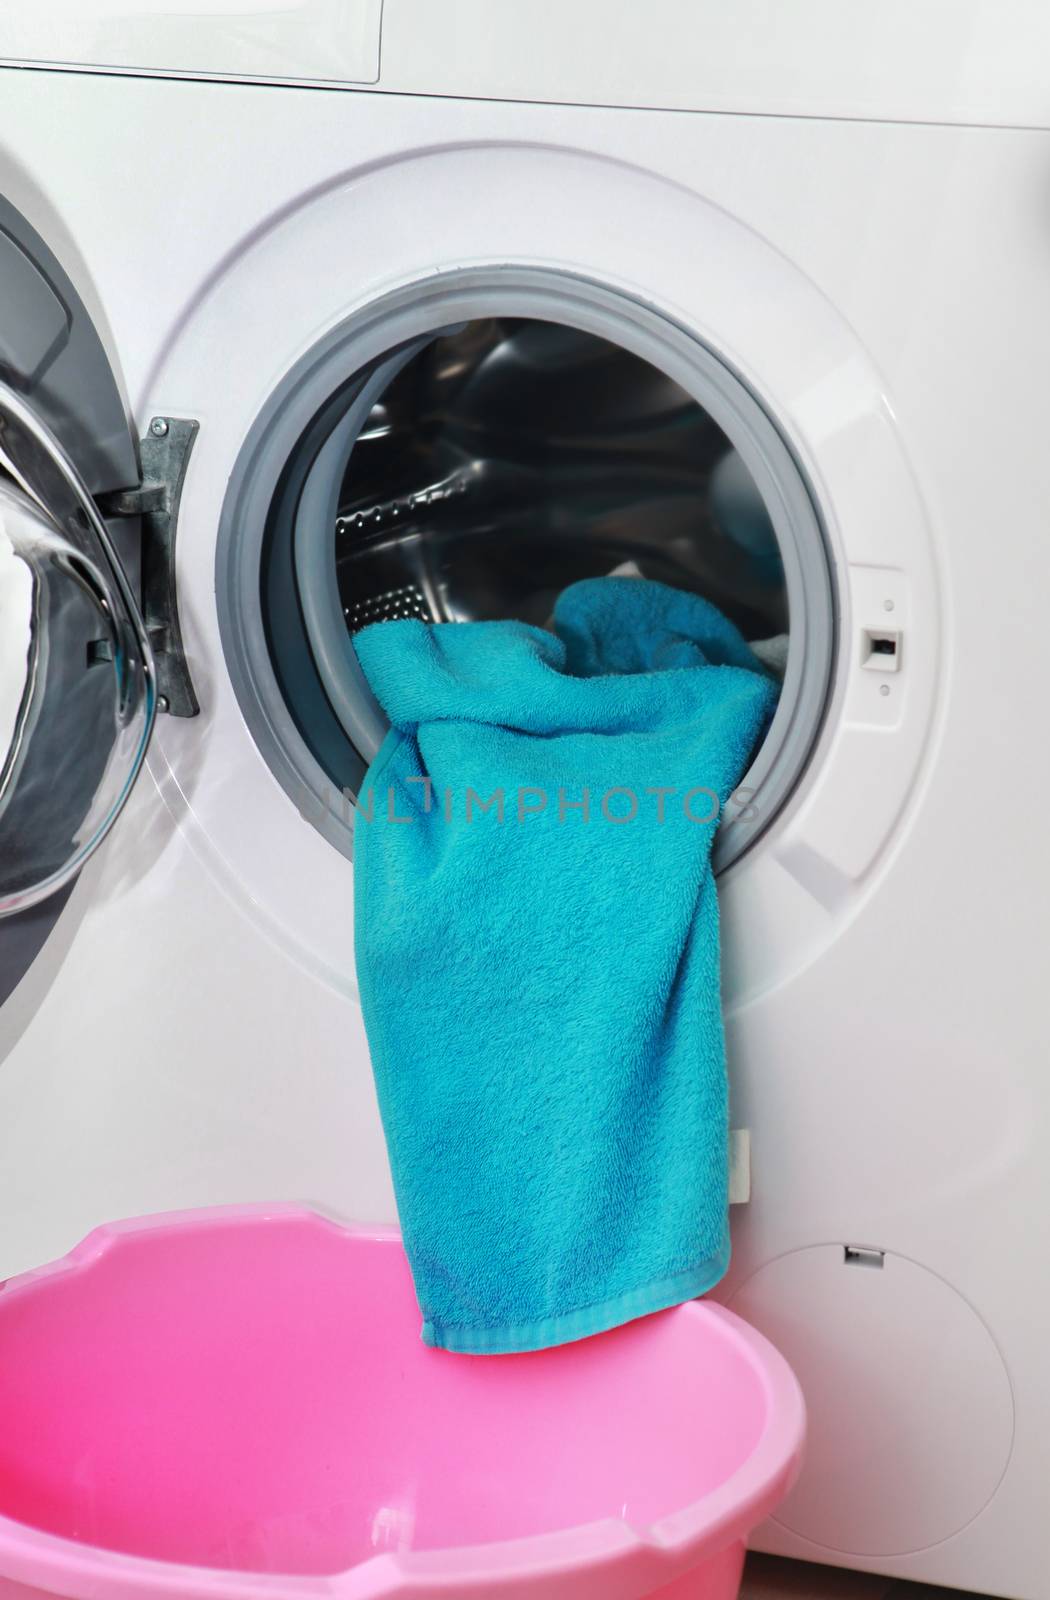 blue terry towel in washing machine by ssuaphoto